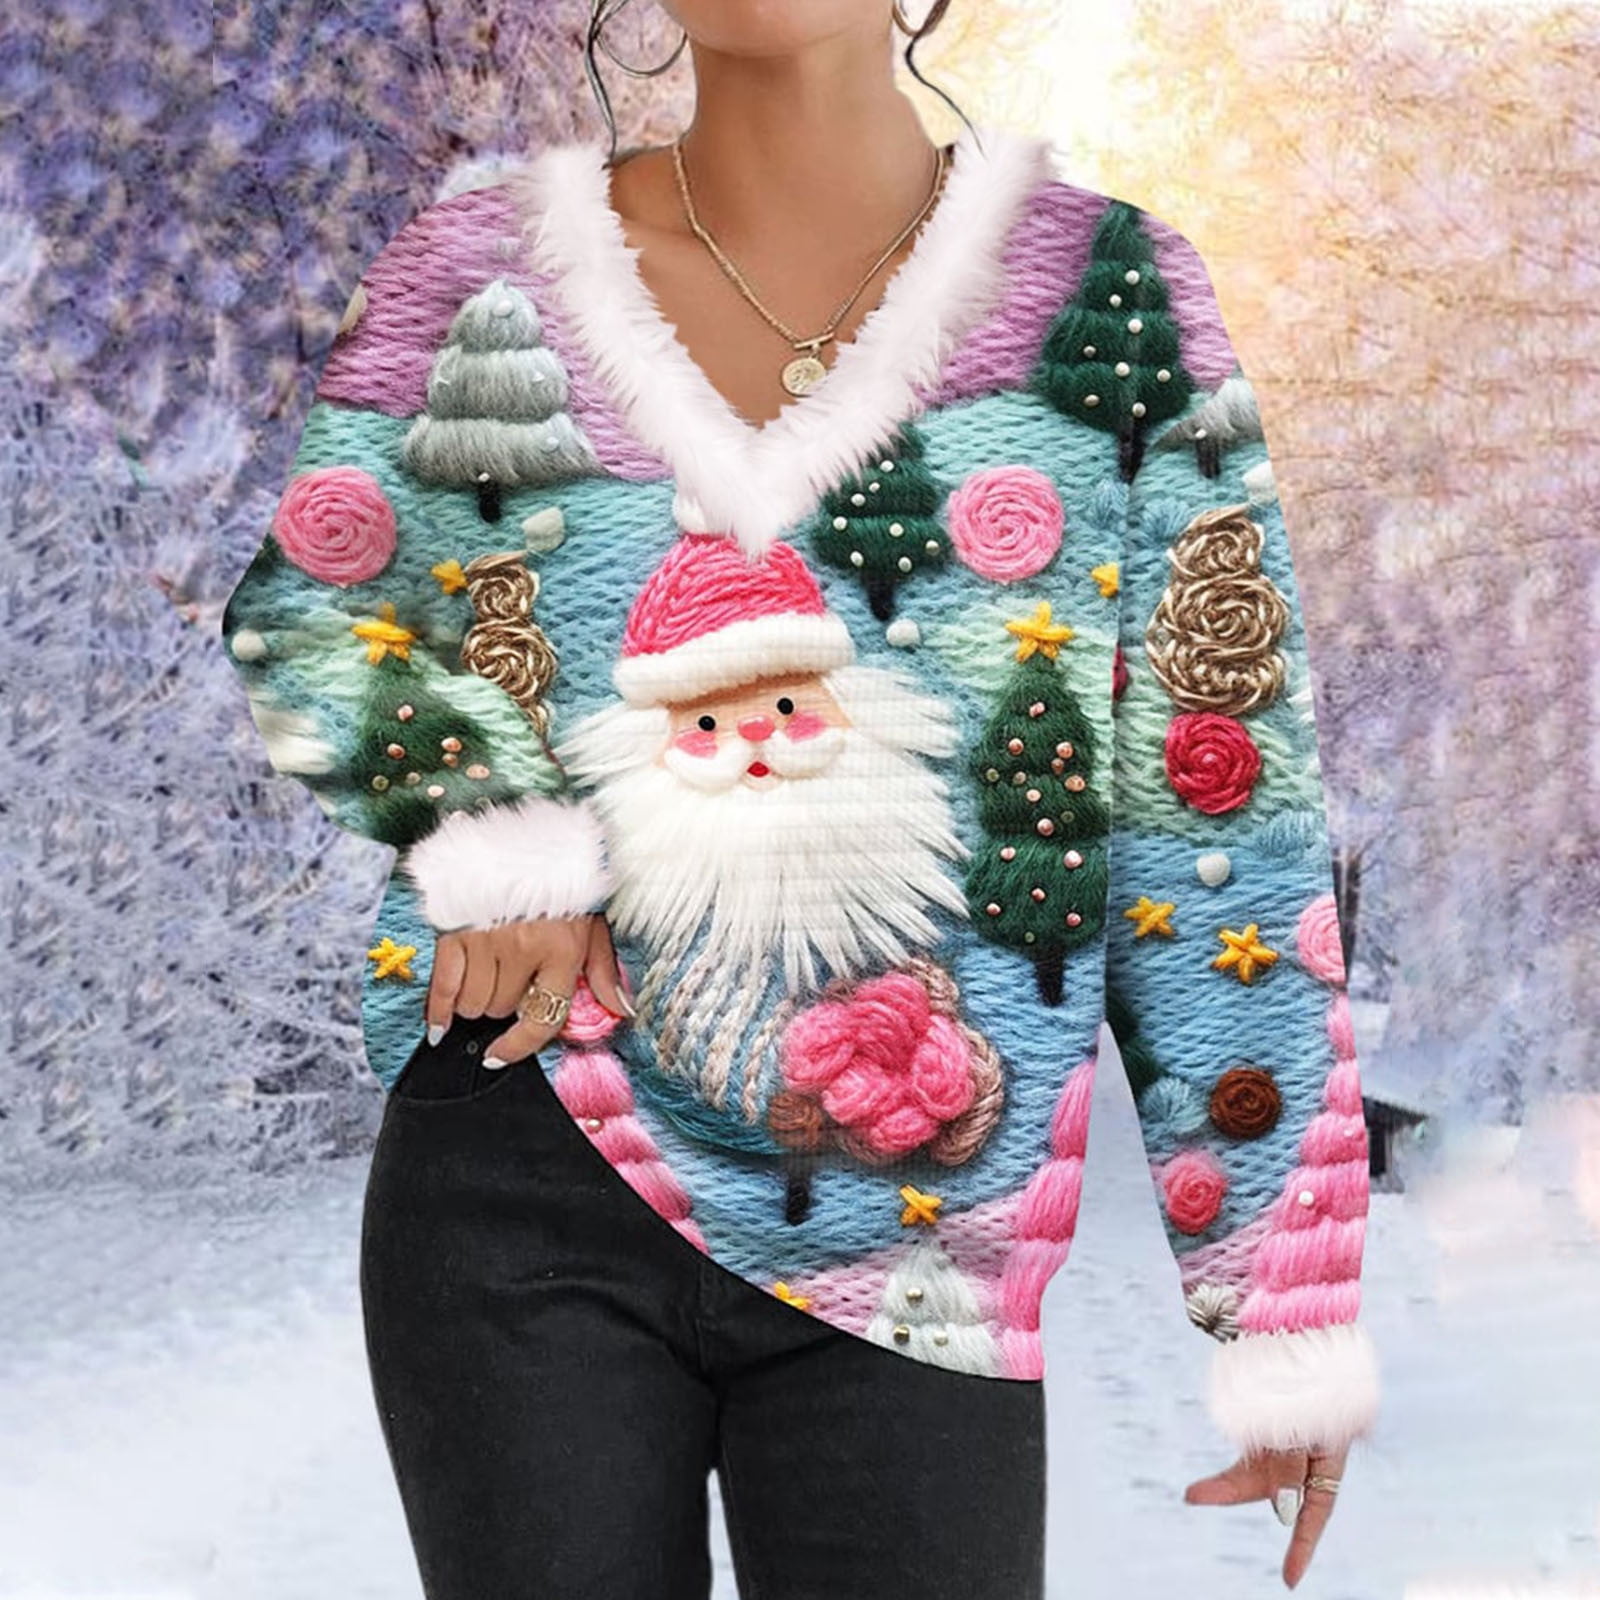  Miekld 2023 Christmas Ugly Sweaters for,things under 1